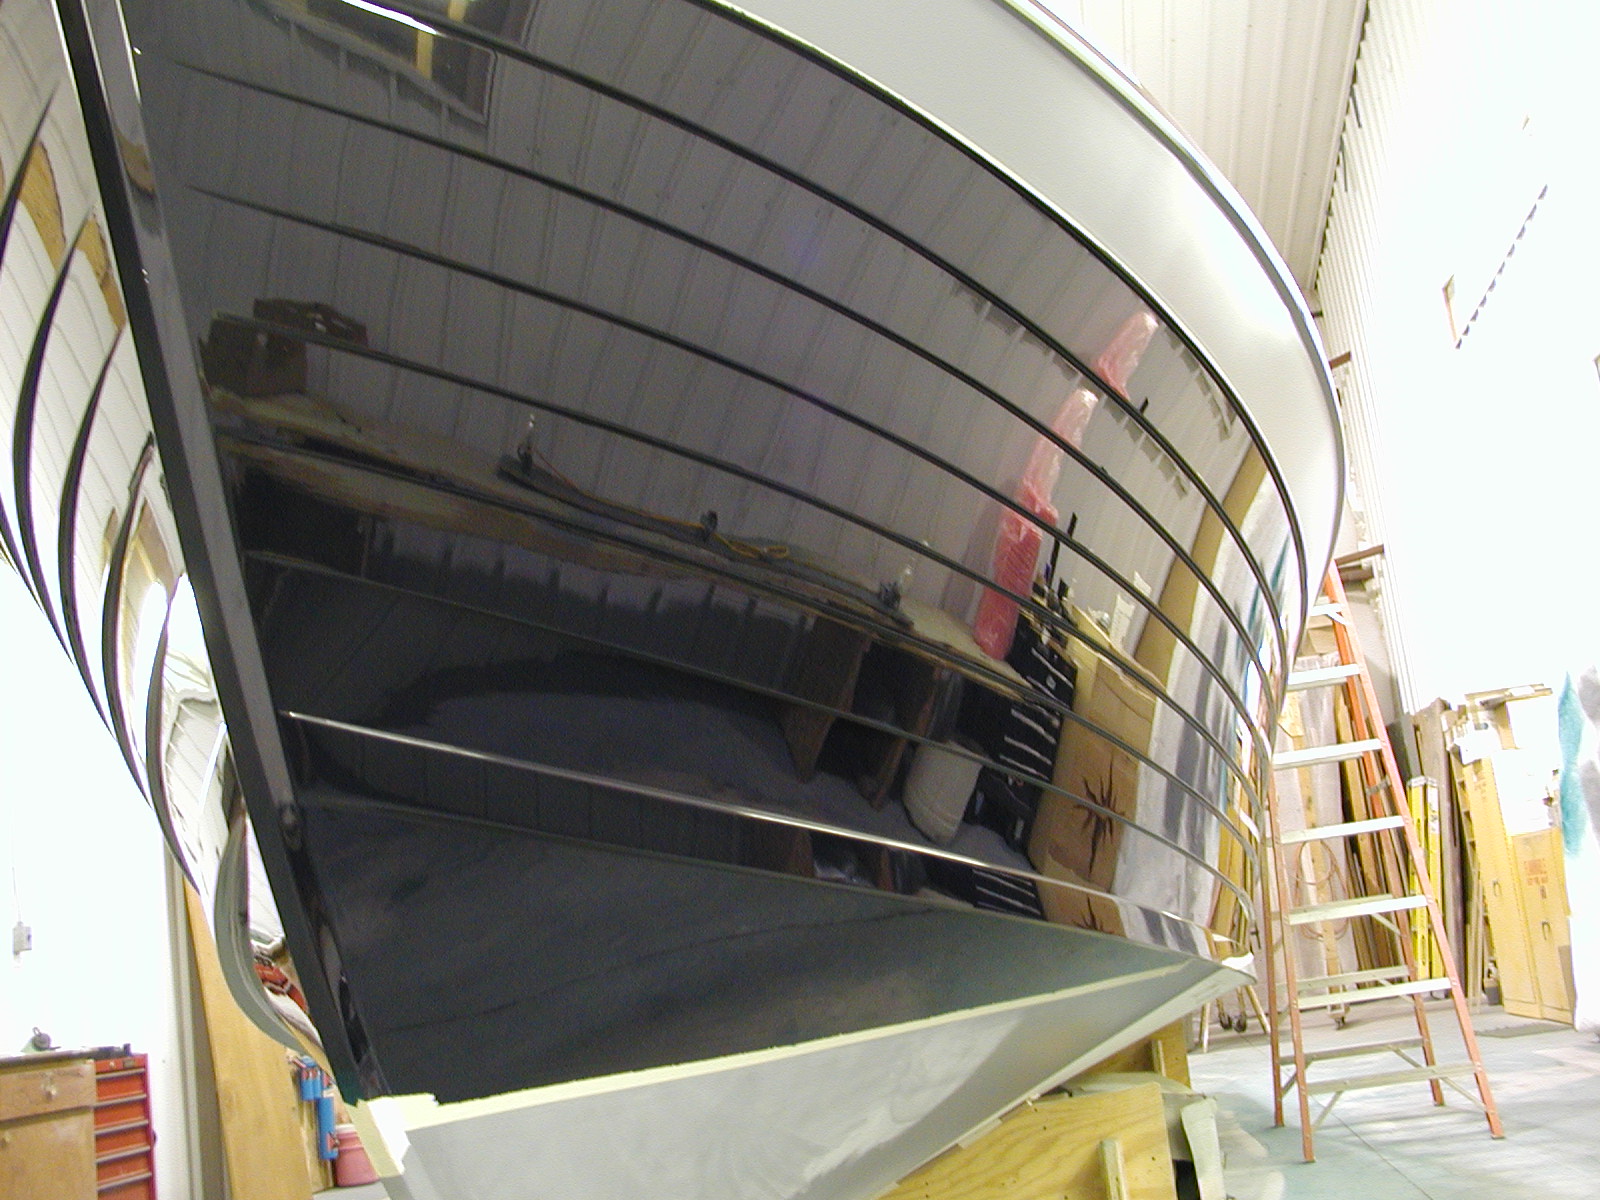 Hull being painted in paint bay on Chocolate Chip 3